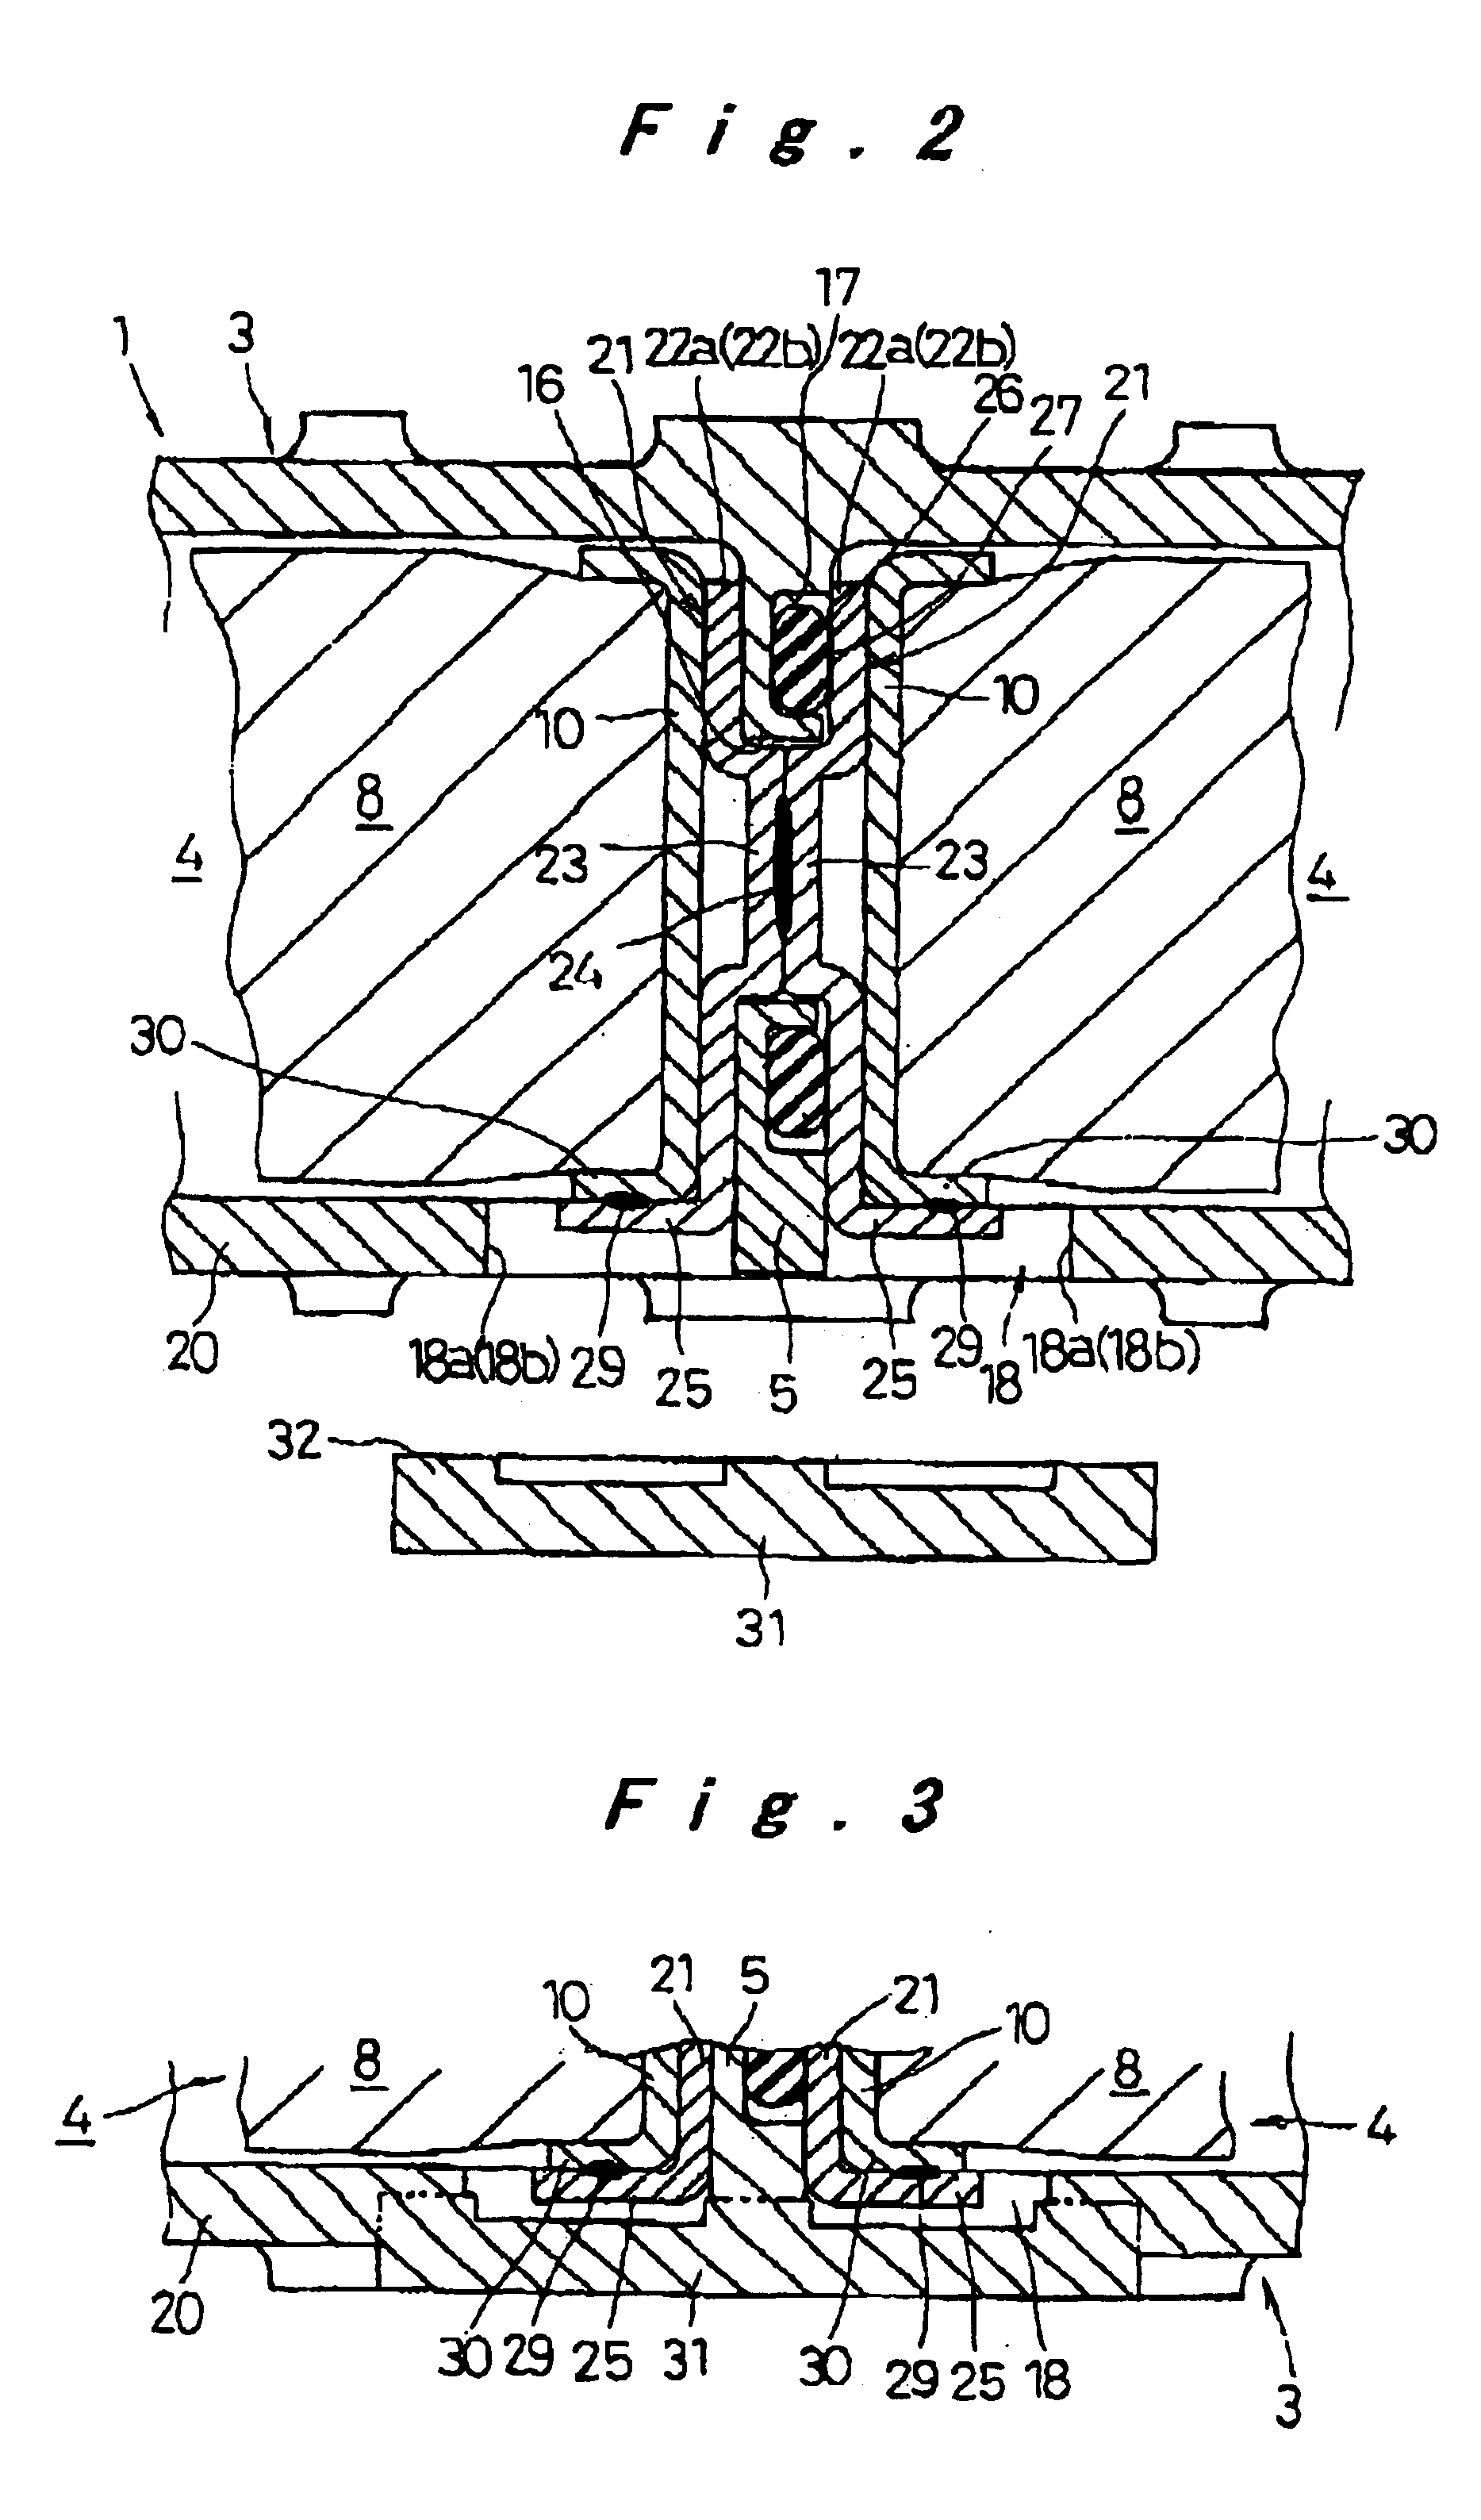 Sealed prismatic battery connected via openings with conductive connection plates